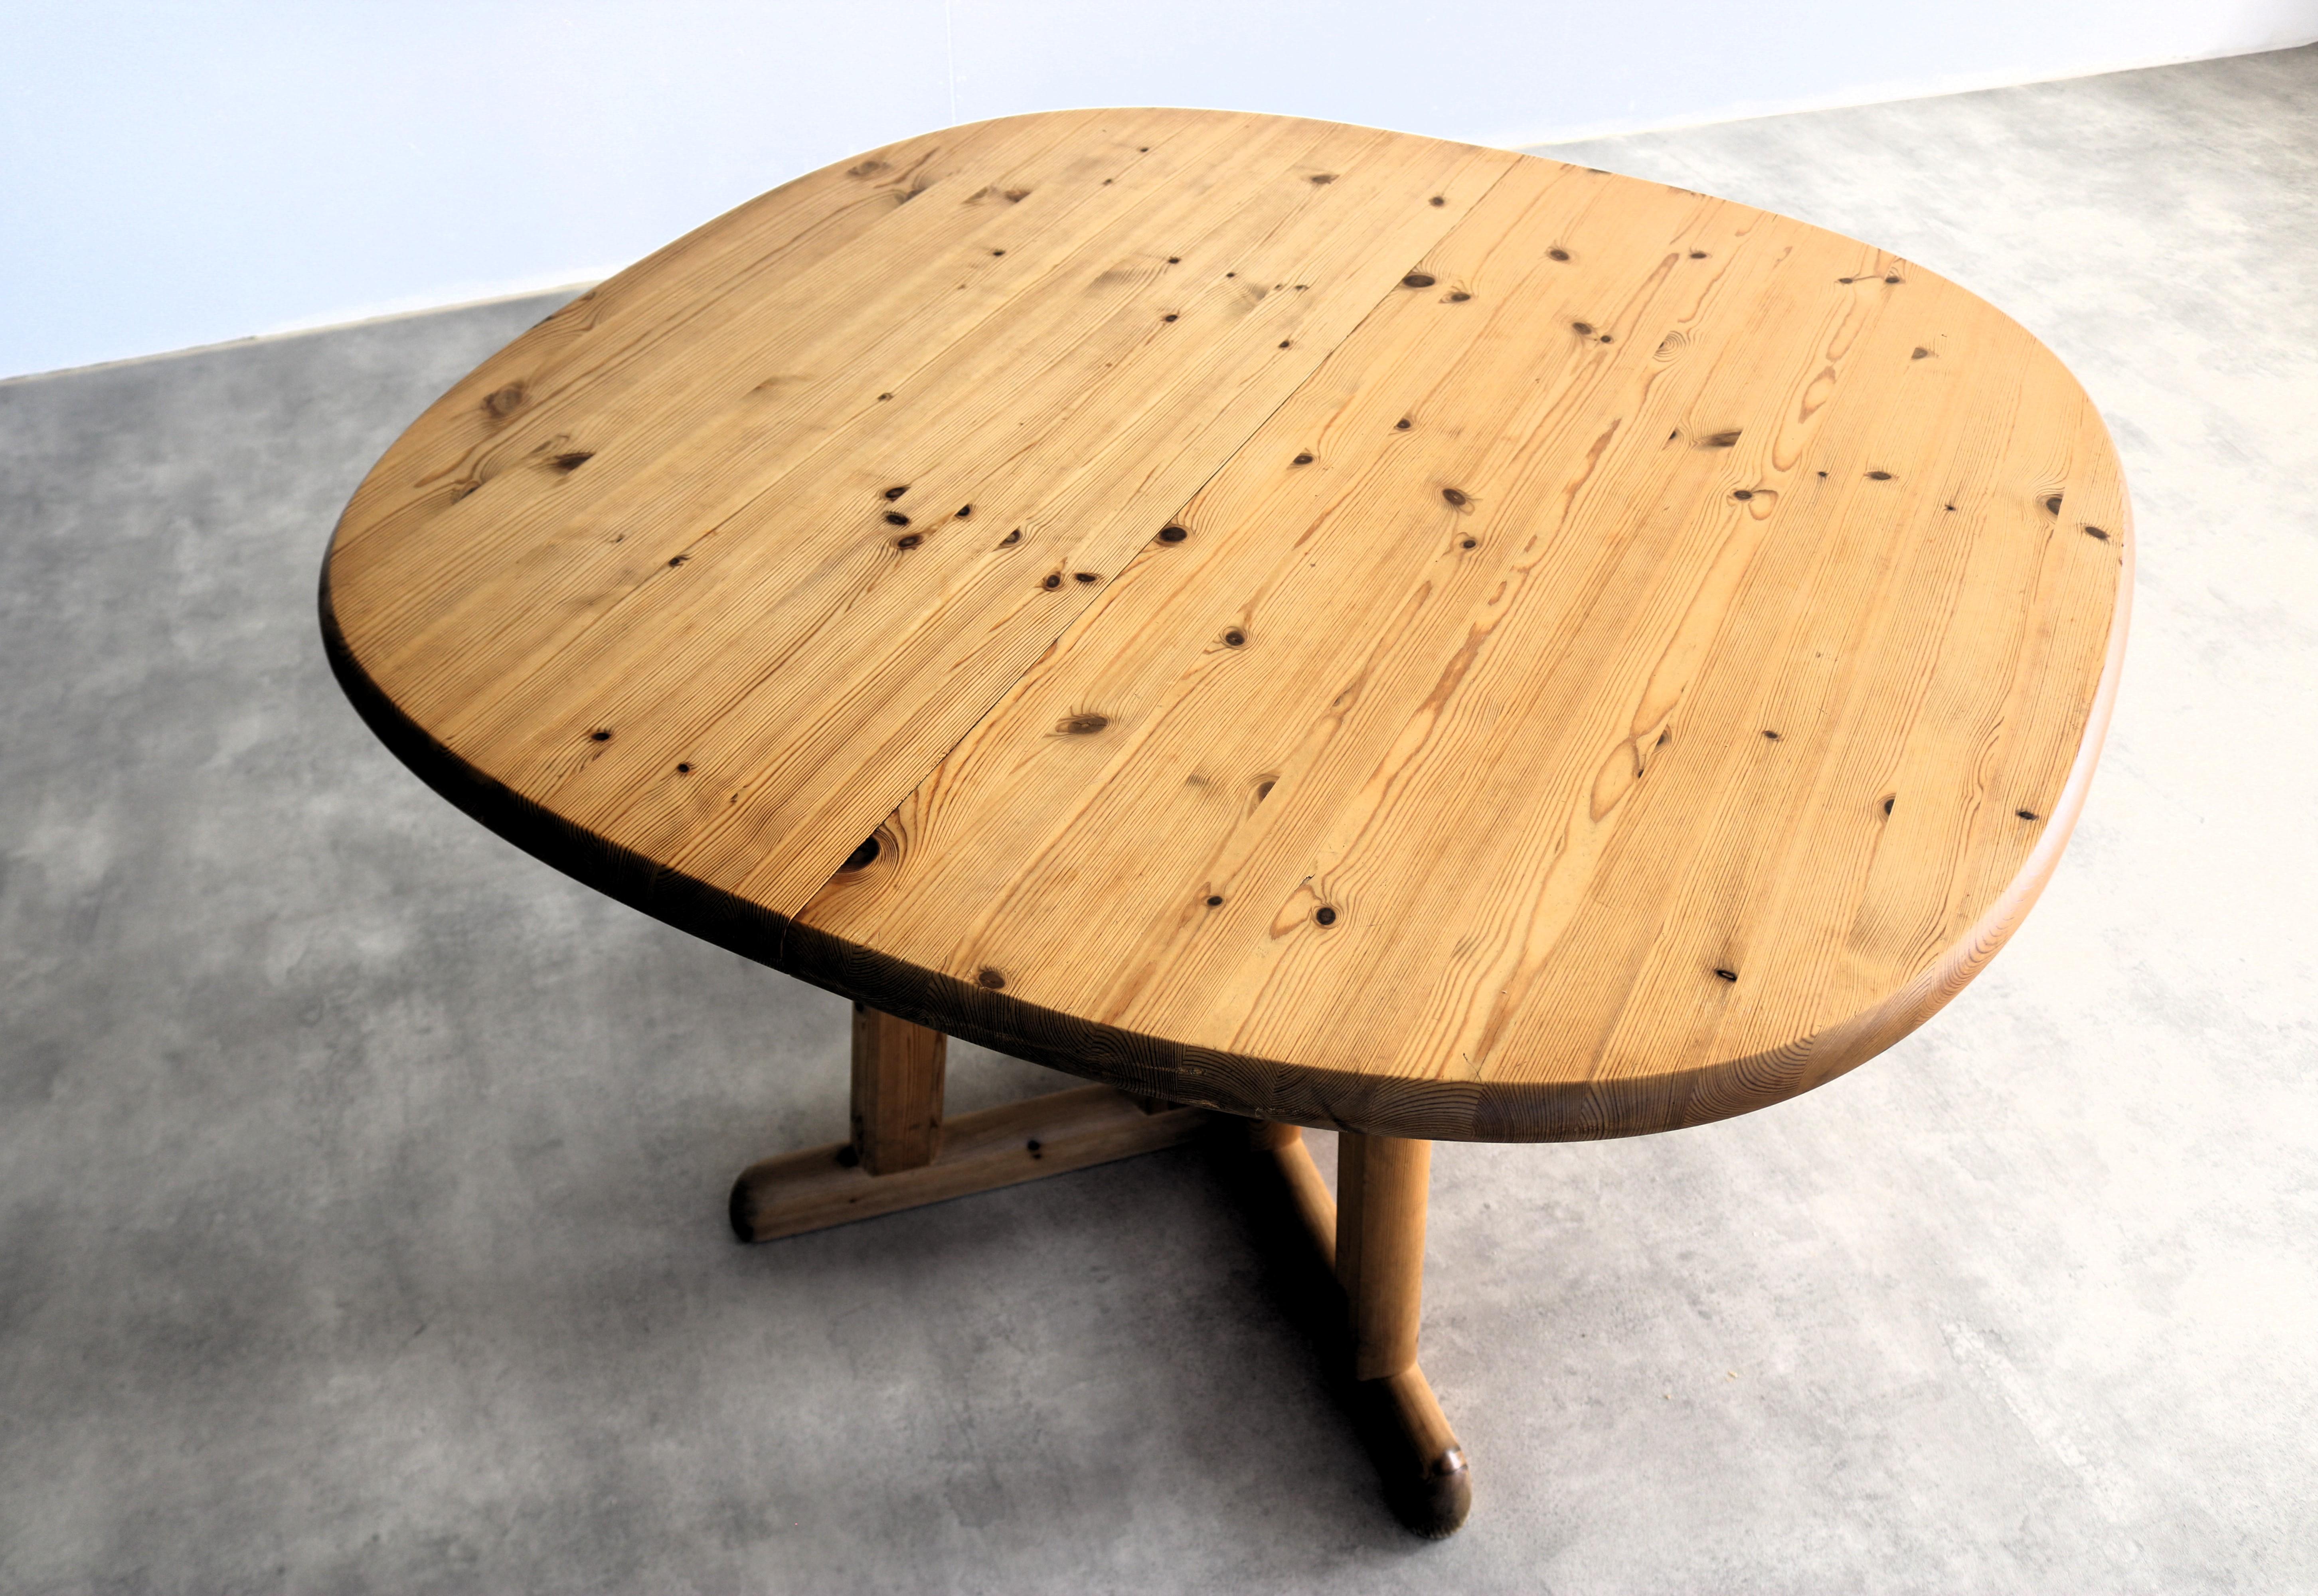 Pine  brutalist dining table  pine table  extendable  70s  